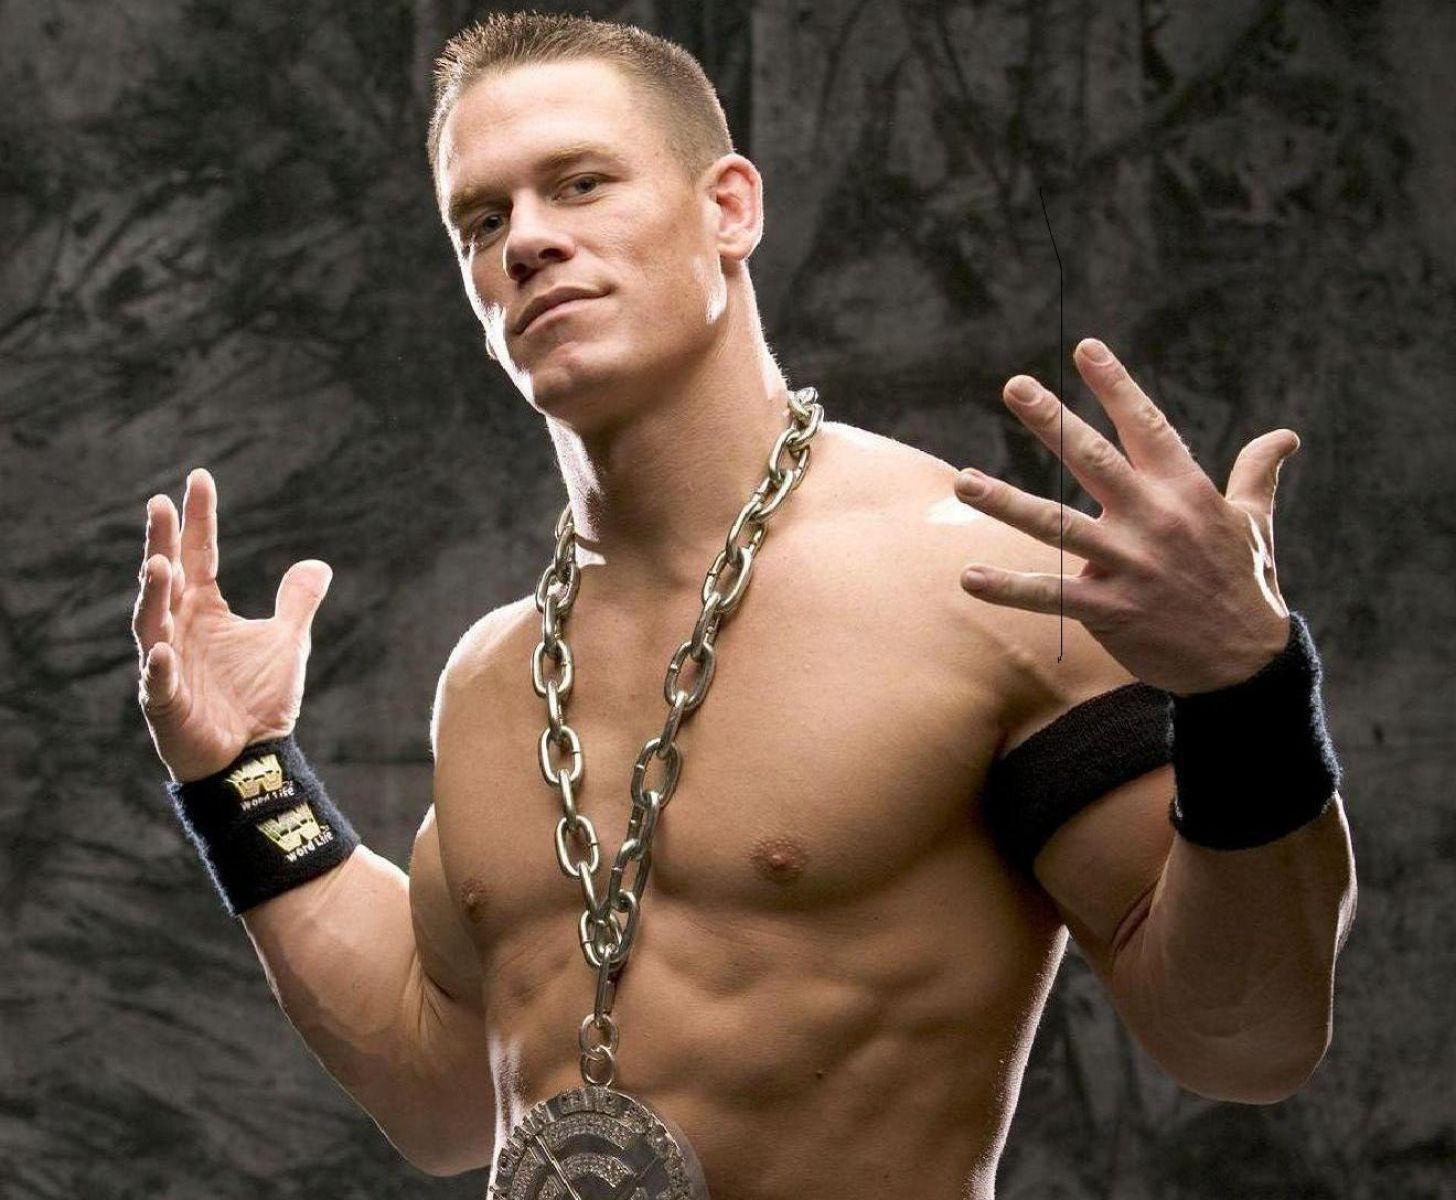 John Cena in Action. HD Hollywood Actors Wallpaper for Mobile